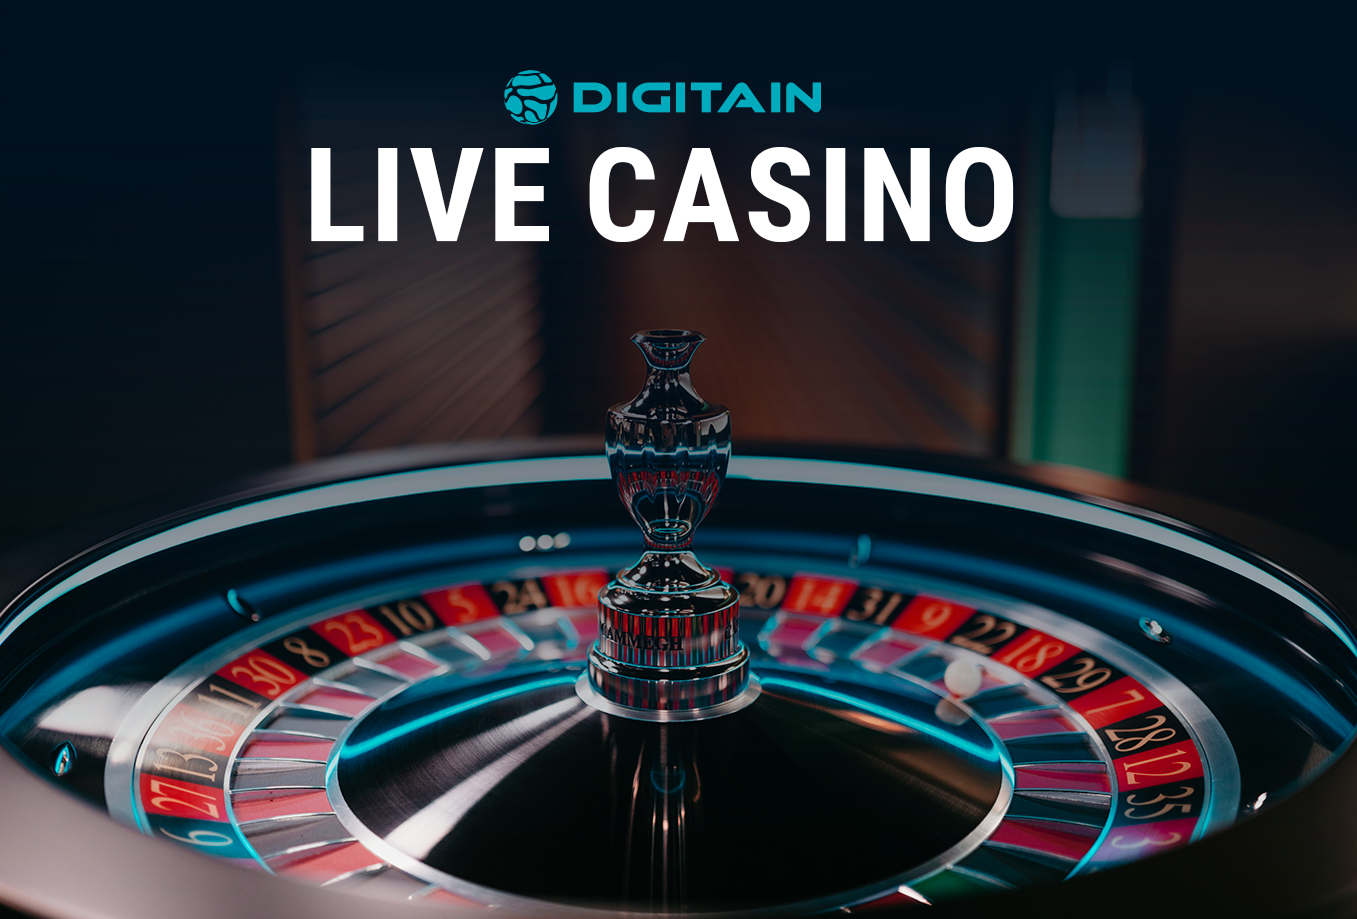 Live Casino by Digitain